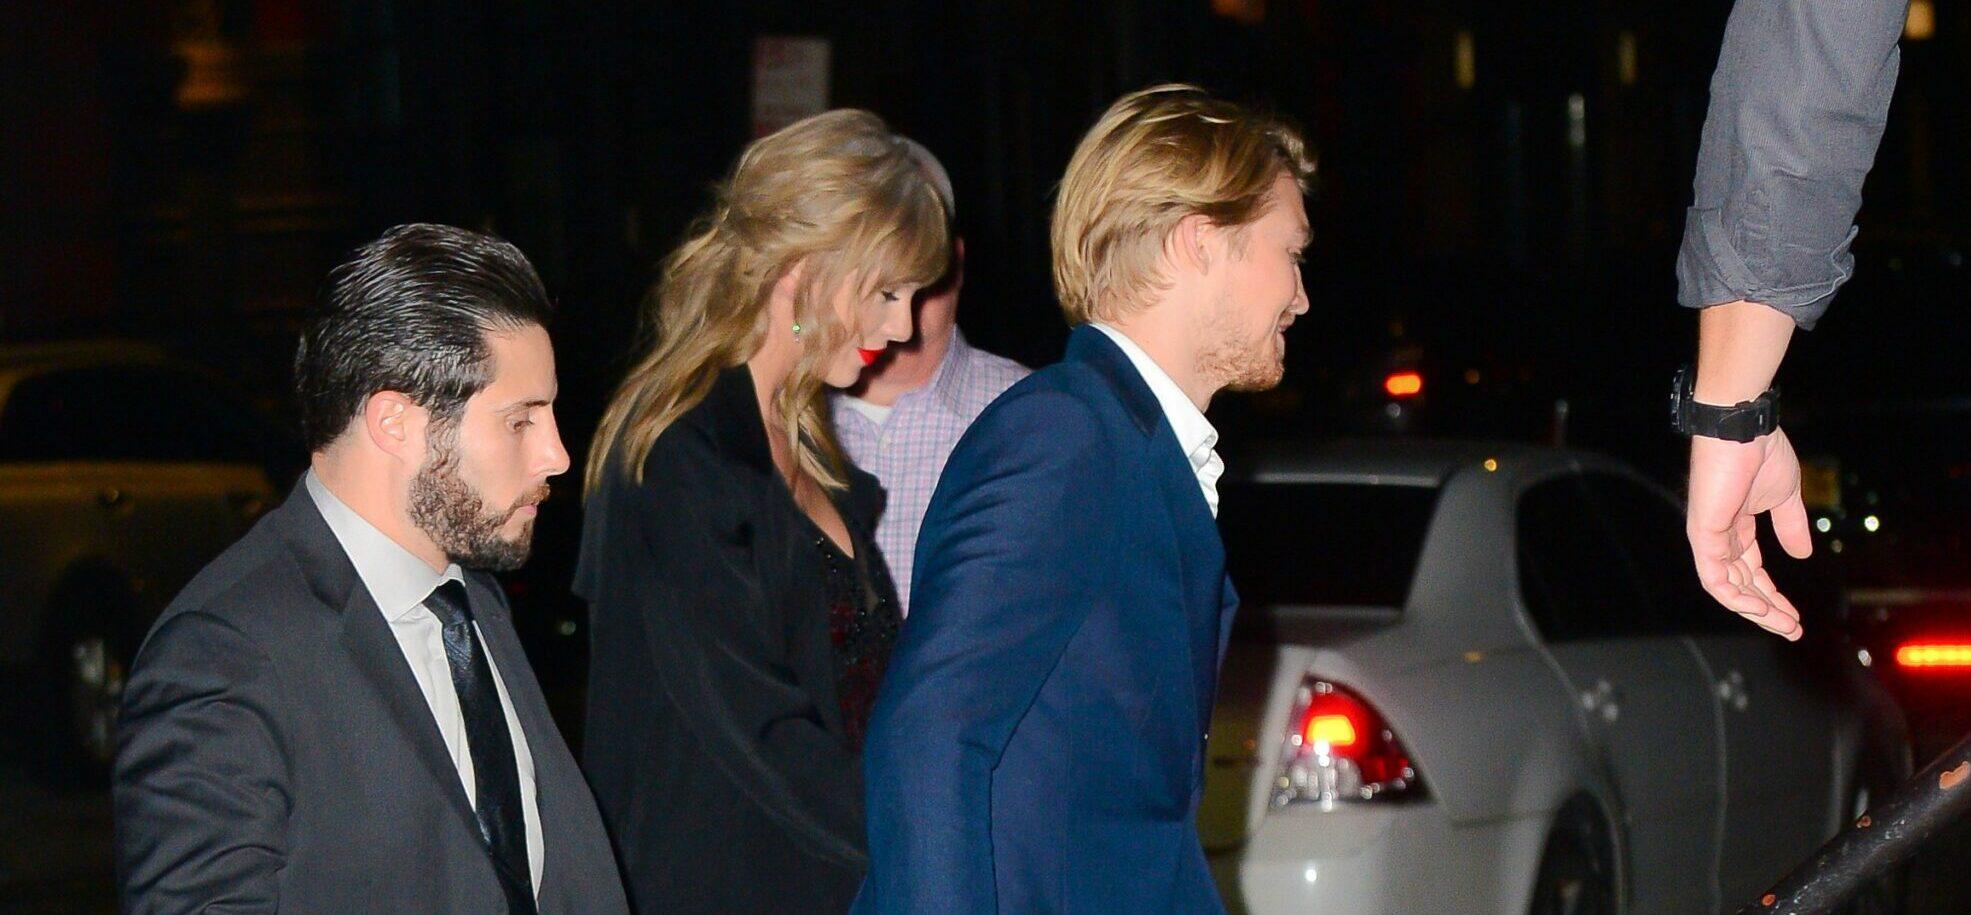 Taylor Swift and Joe Alwyn spotted arriving back at her apartment in New York